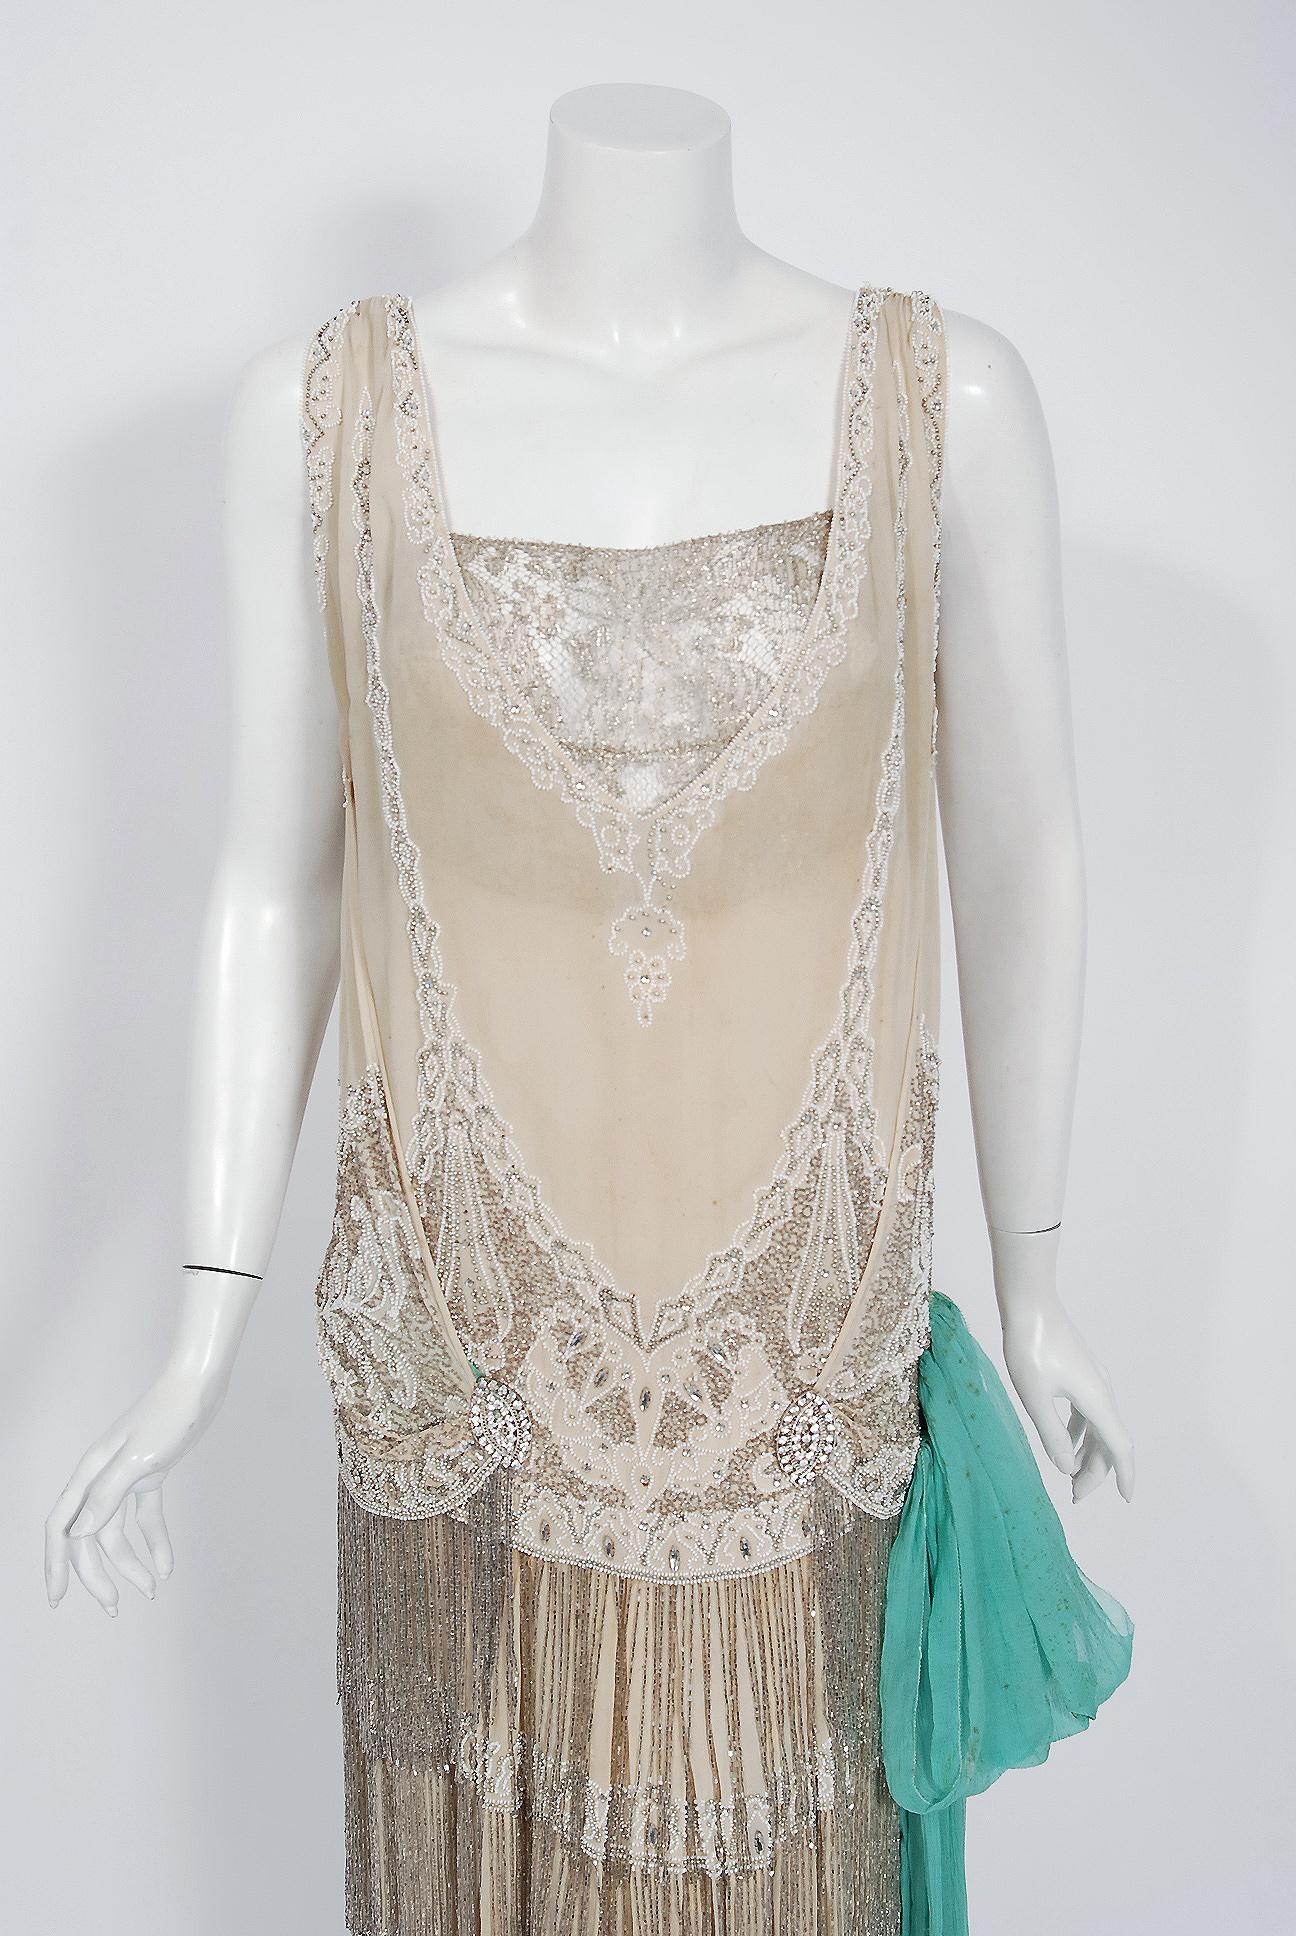 Undiminished by time, this 1920's ivory-creme flapper dance dress still casts its magical spell. This exceptional French beauty is fashioned in three different couture fabrics- creme silk chiffon, metallic gold lace and robin-egg blue silk crepe. It